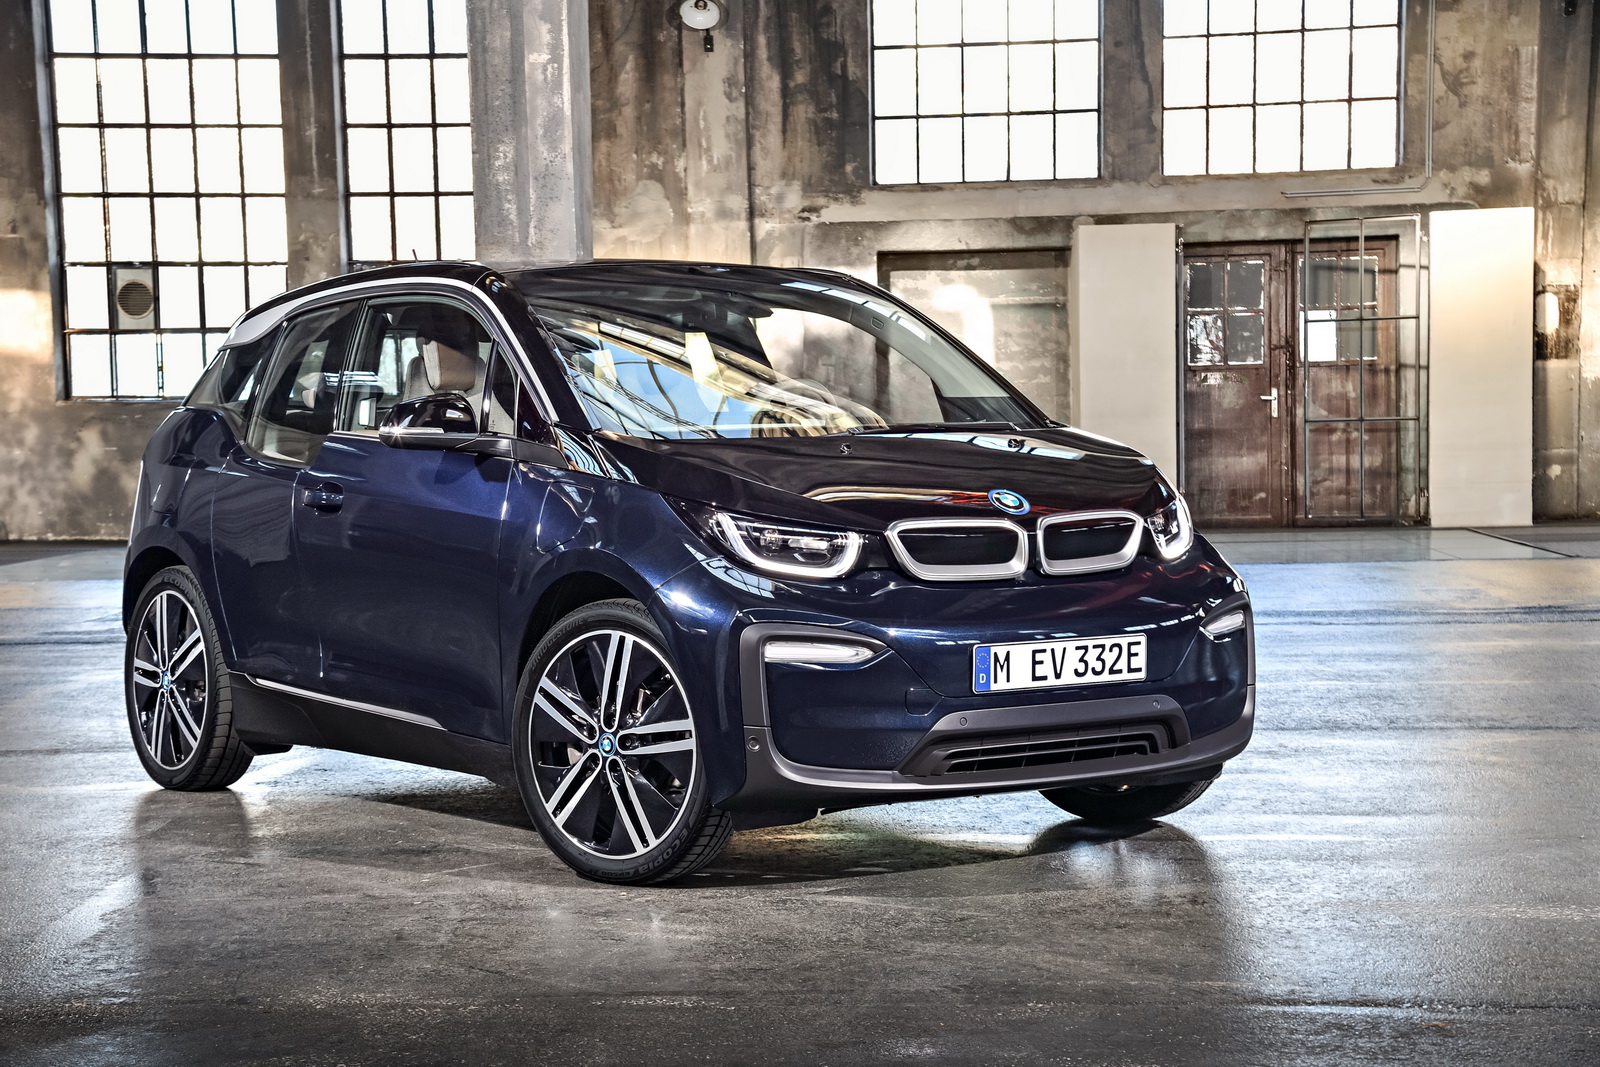 Gallery: 2018 BMW i3 & i3S Kick Off in the UK, Prices also Released